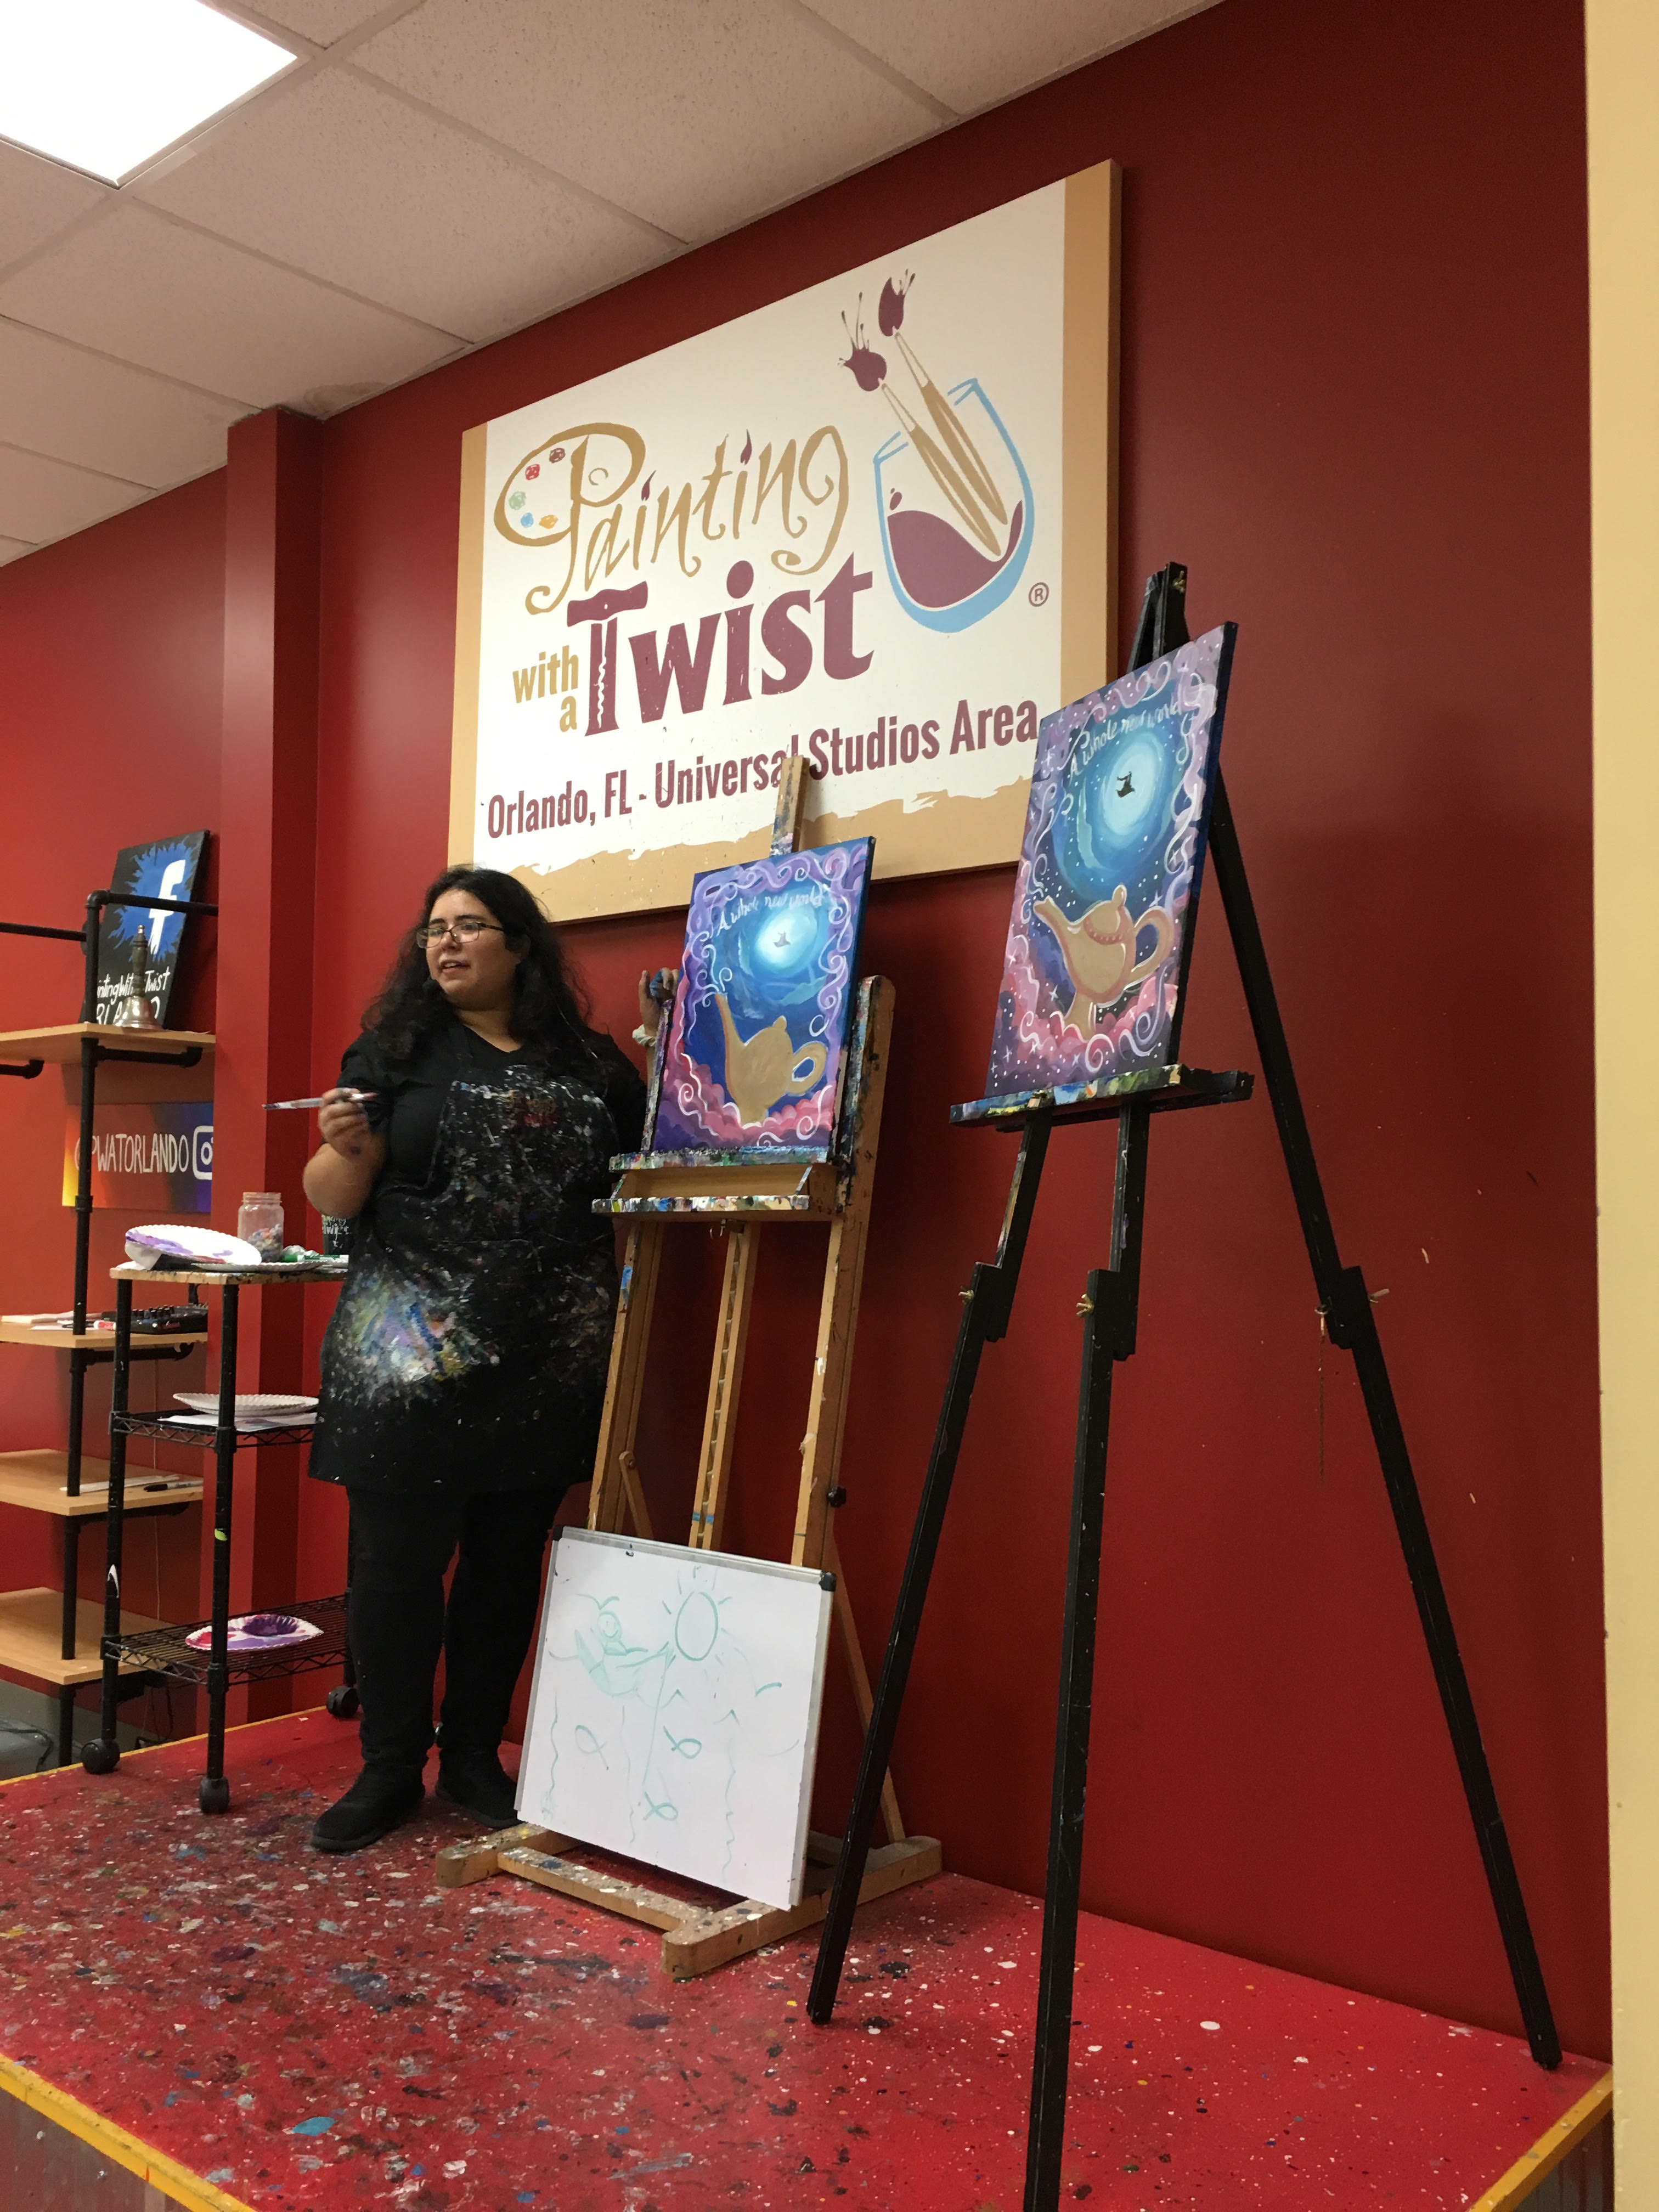 Painting with a Twist Orlando review